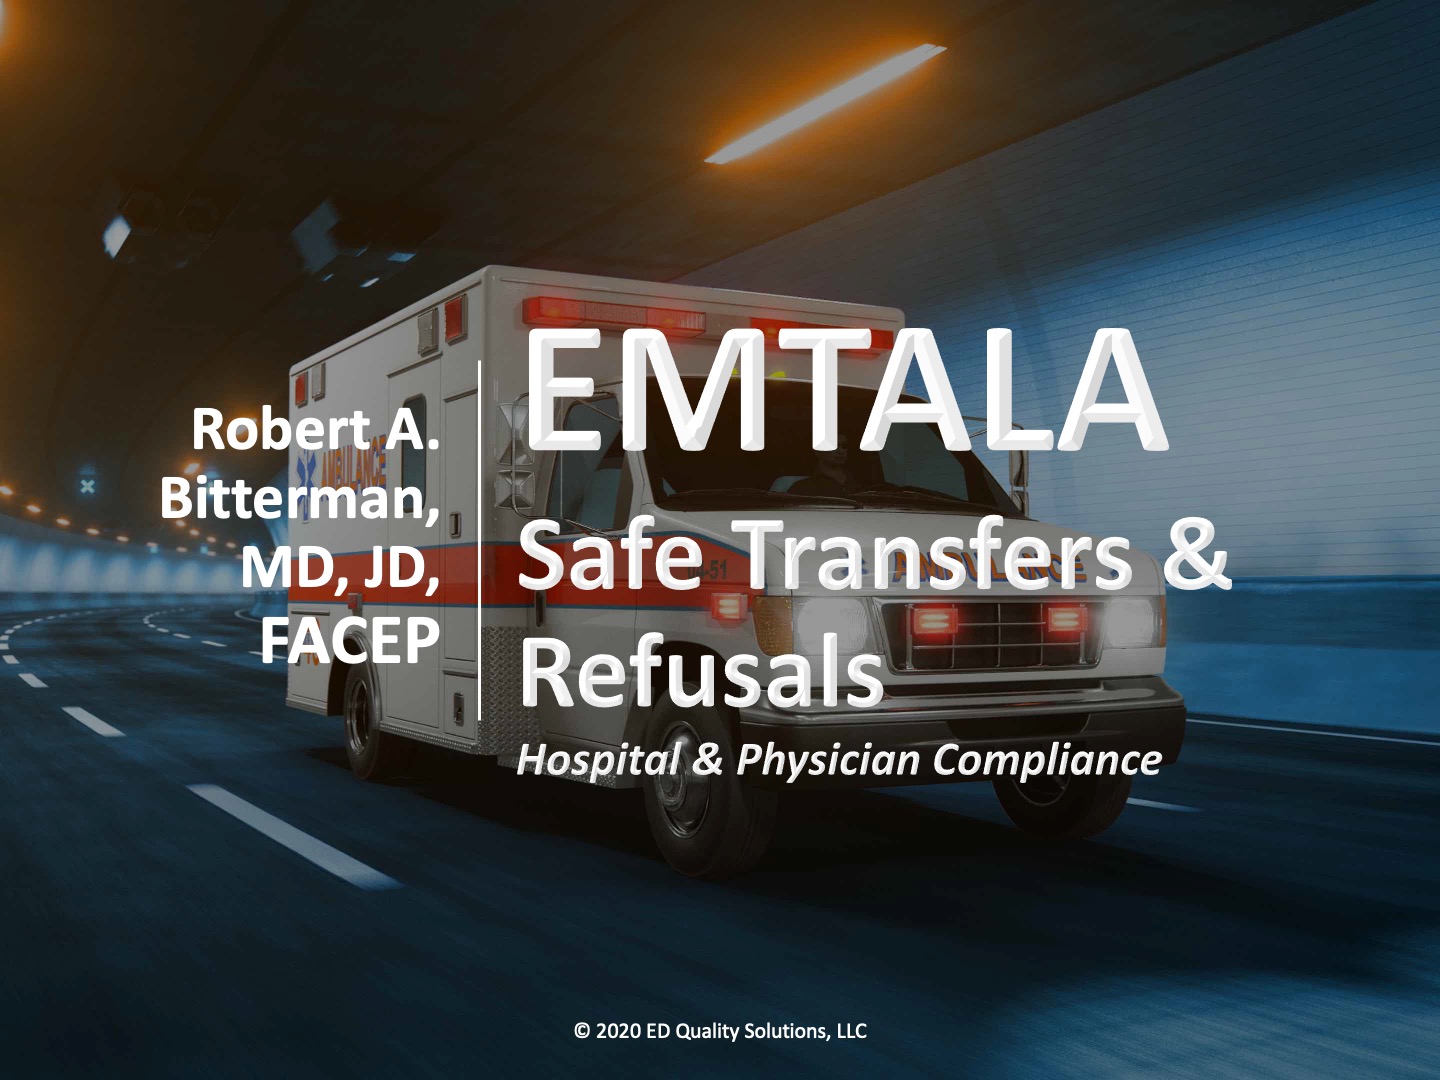 emtala-transfers-and-refusals-ed-quality-solutions-llc